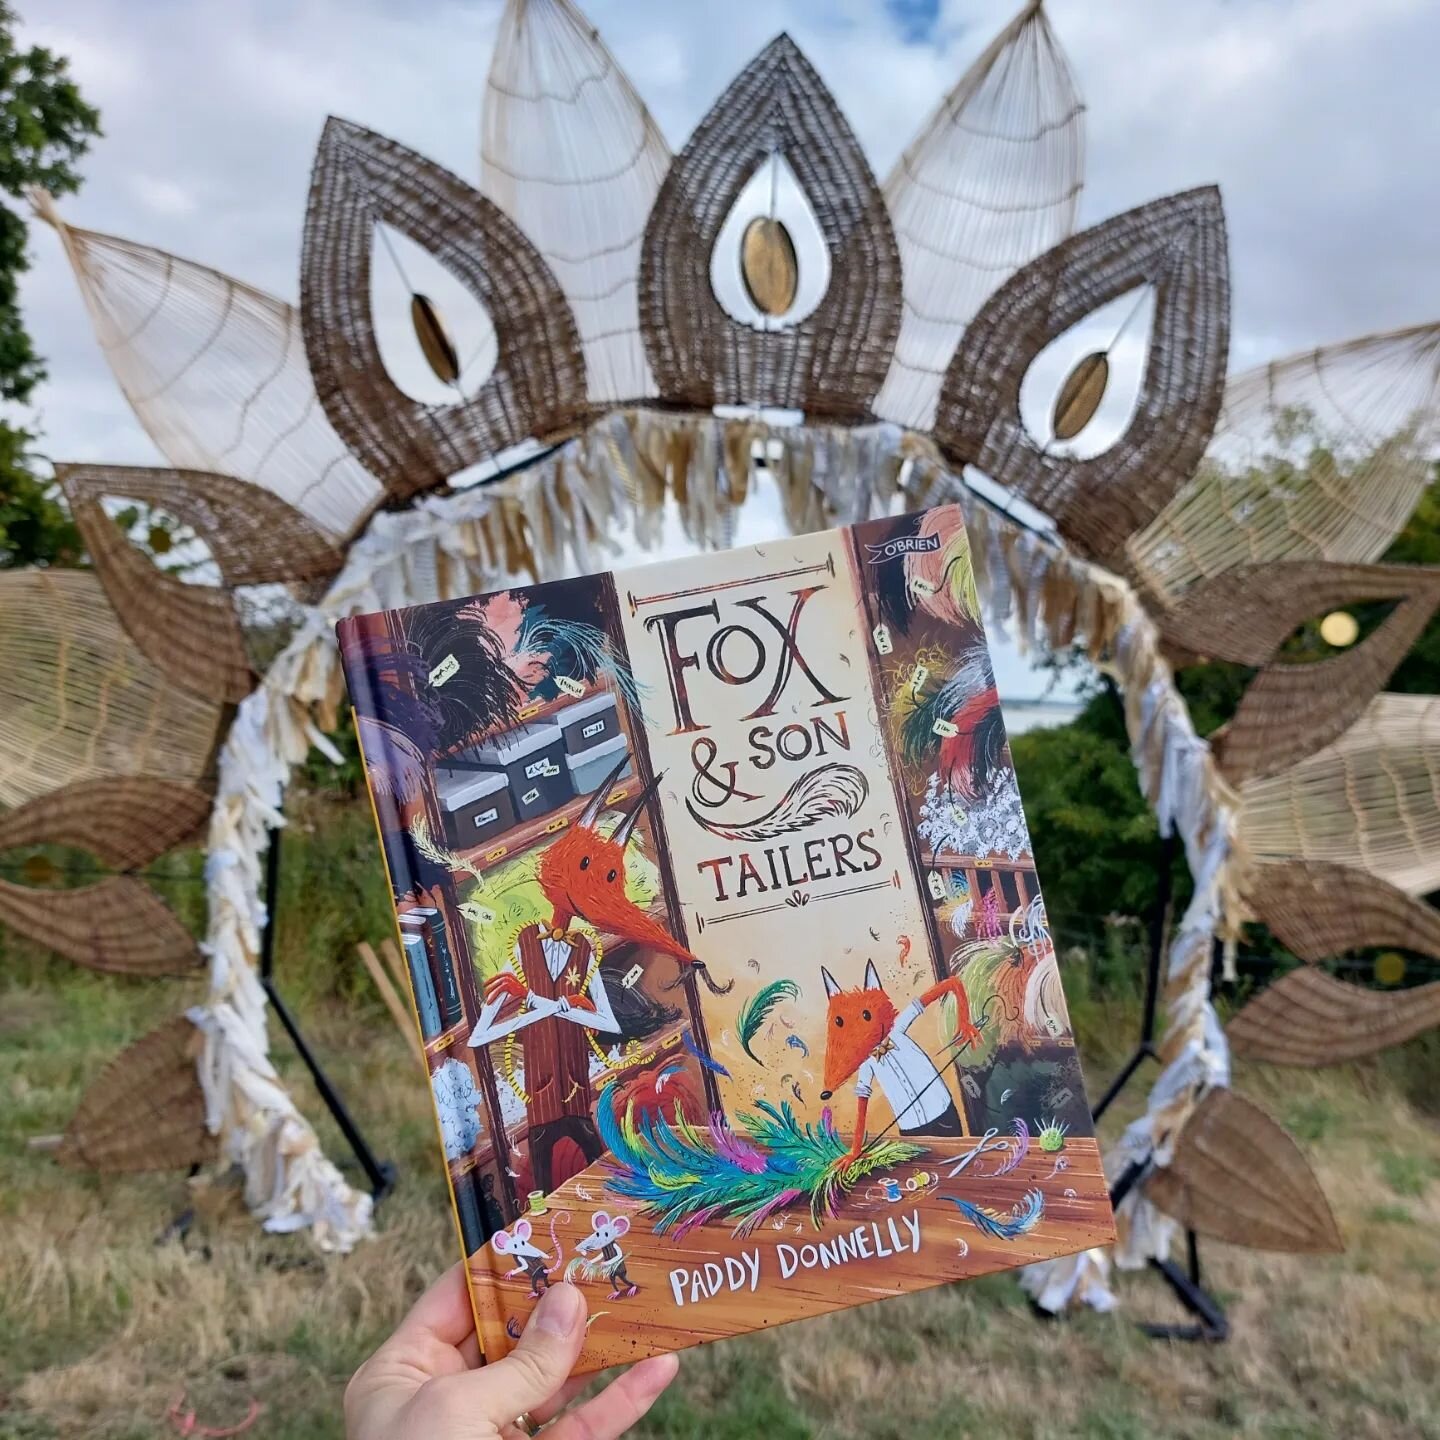 I have two joyous celebrations of creativity on the grid for you this Sunday evening. 

[Ad-PR ] 📙Fox &amp; Son ~ Tailers ✏️ Paddy Donnelly 📚 O'Brien Press 

First up, this beauty of a book from @paddy. I love his stories. There's always a hint if 